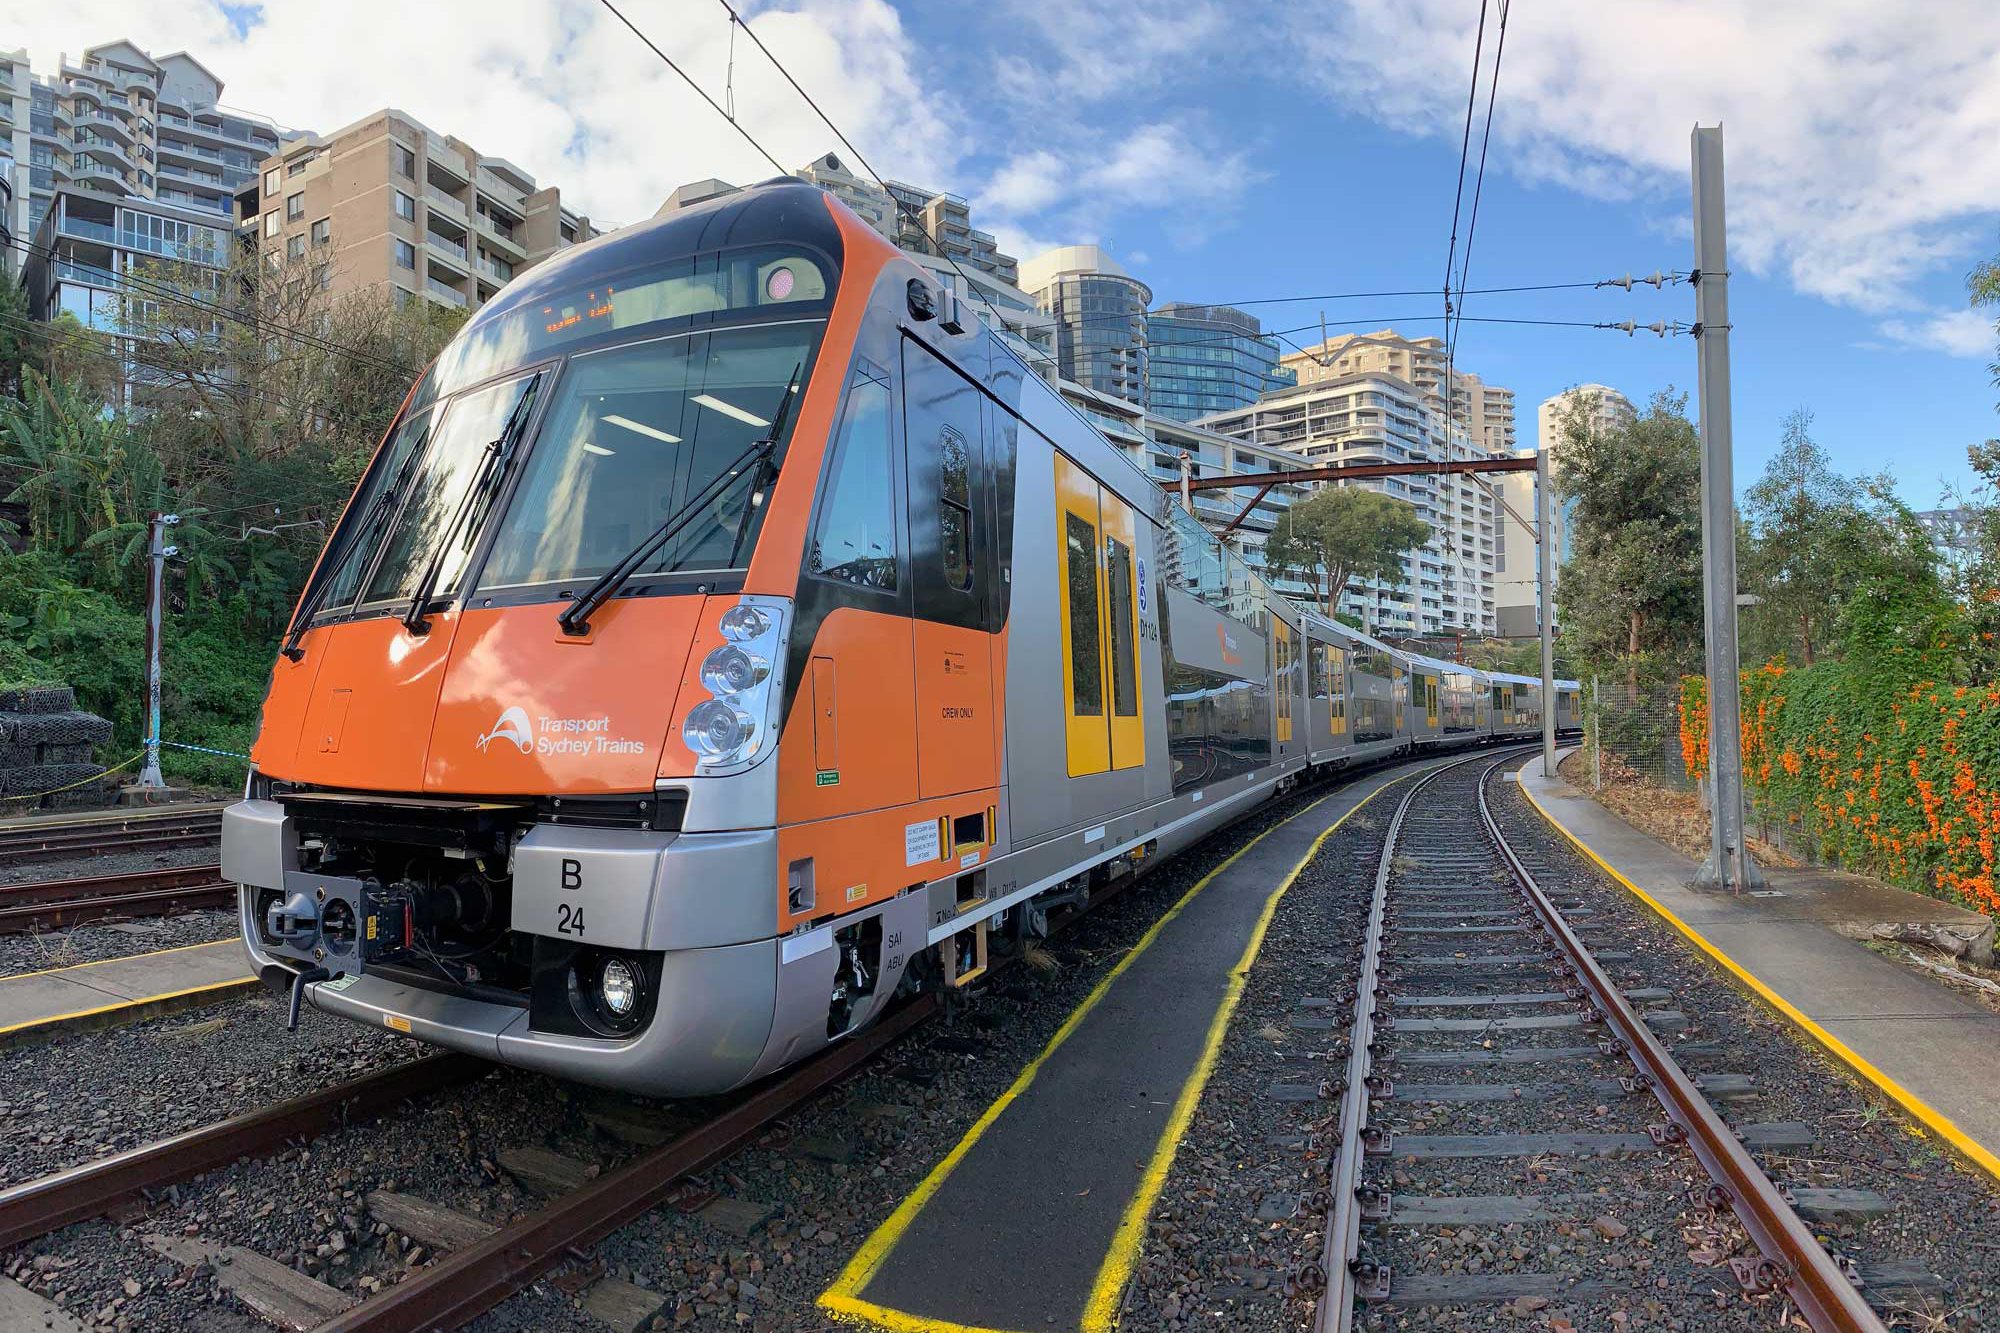 A 'Transport Sydney Trains' train travelling through the city